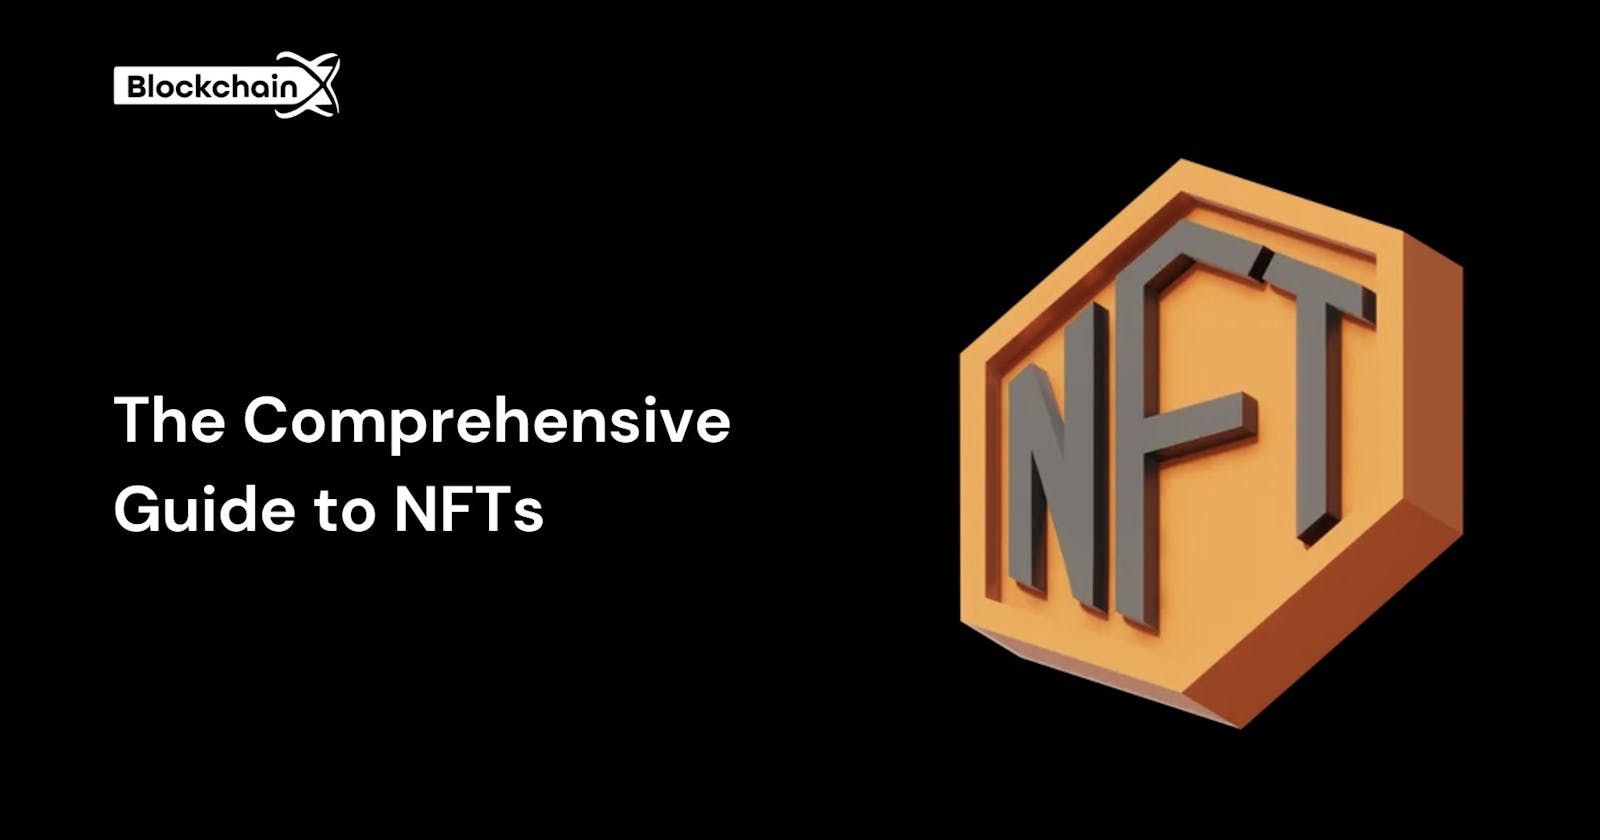 The Comprehensive Guide to NFTs: Understanding, Operating, and Creating NFT Marketplaces